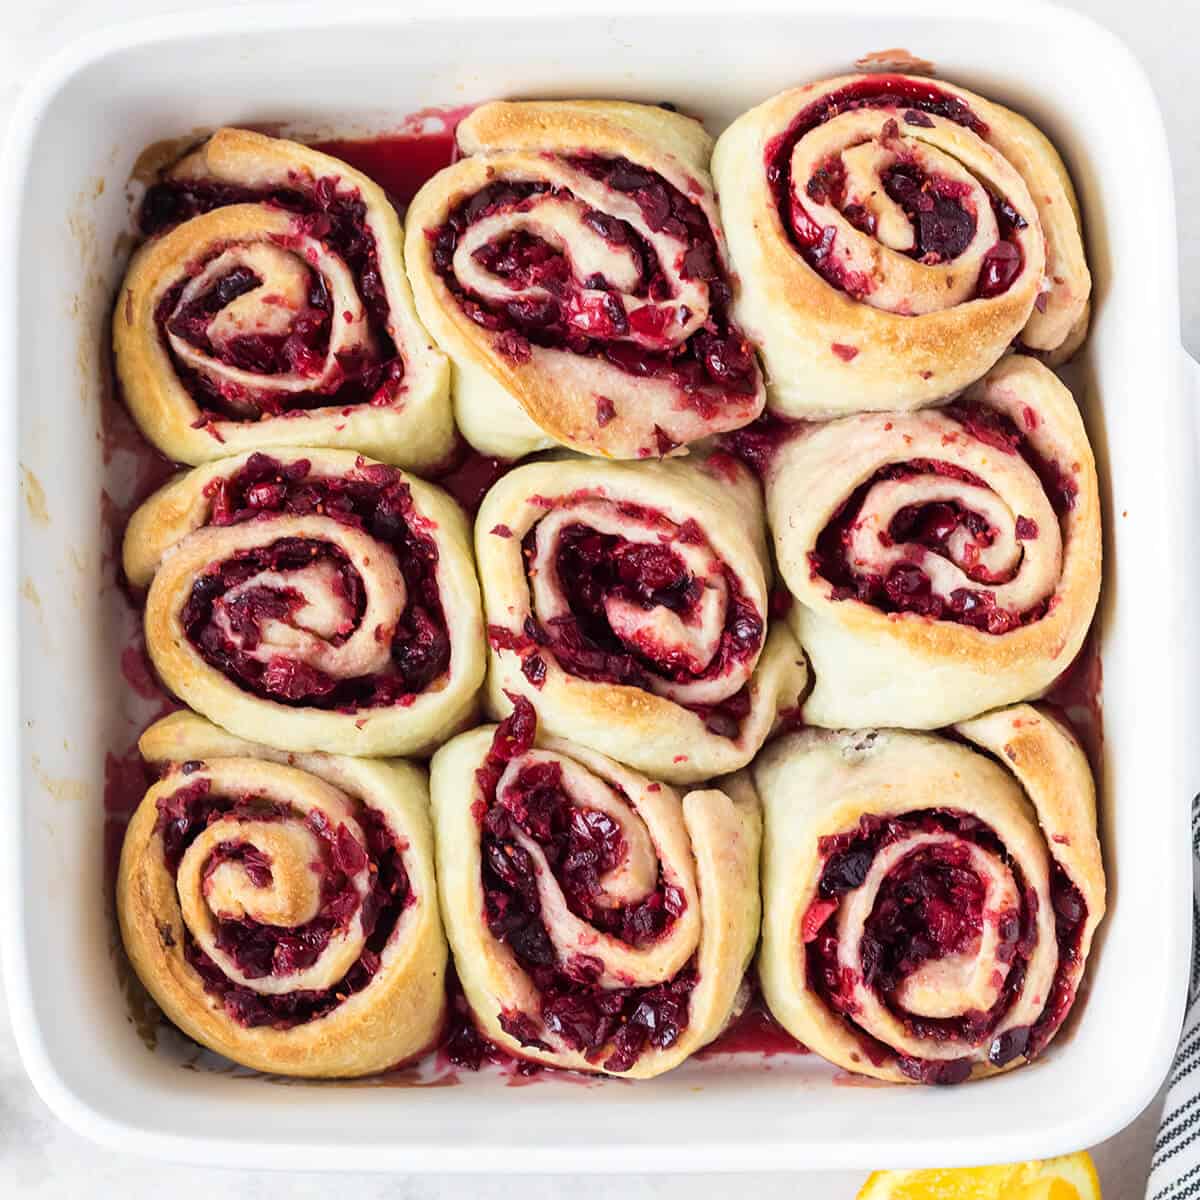 Rolls after baking.